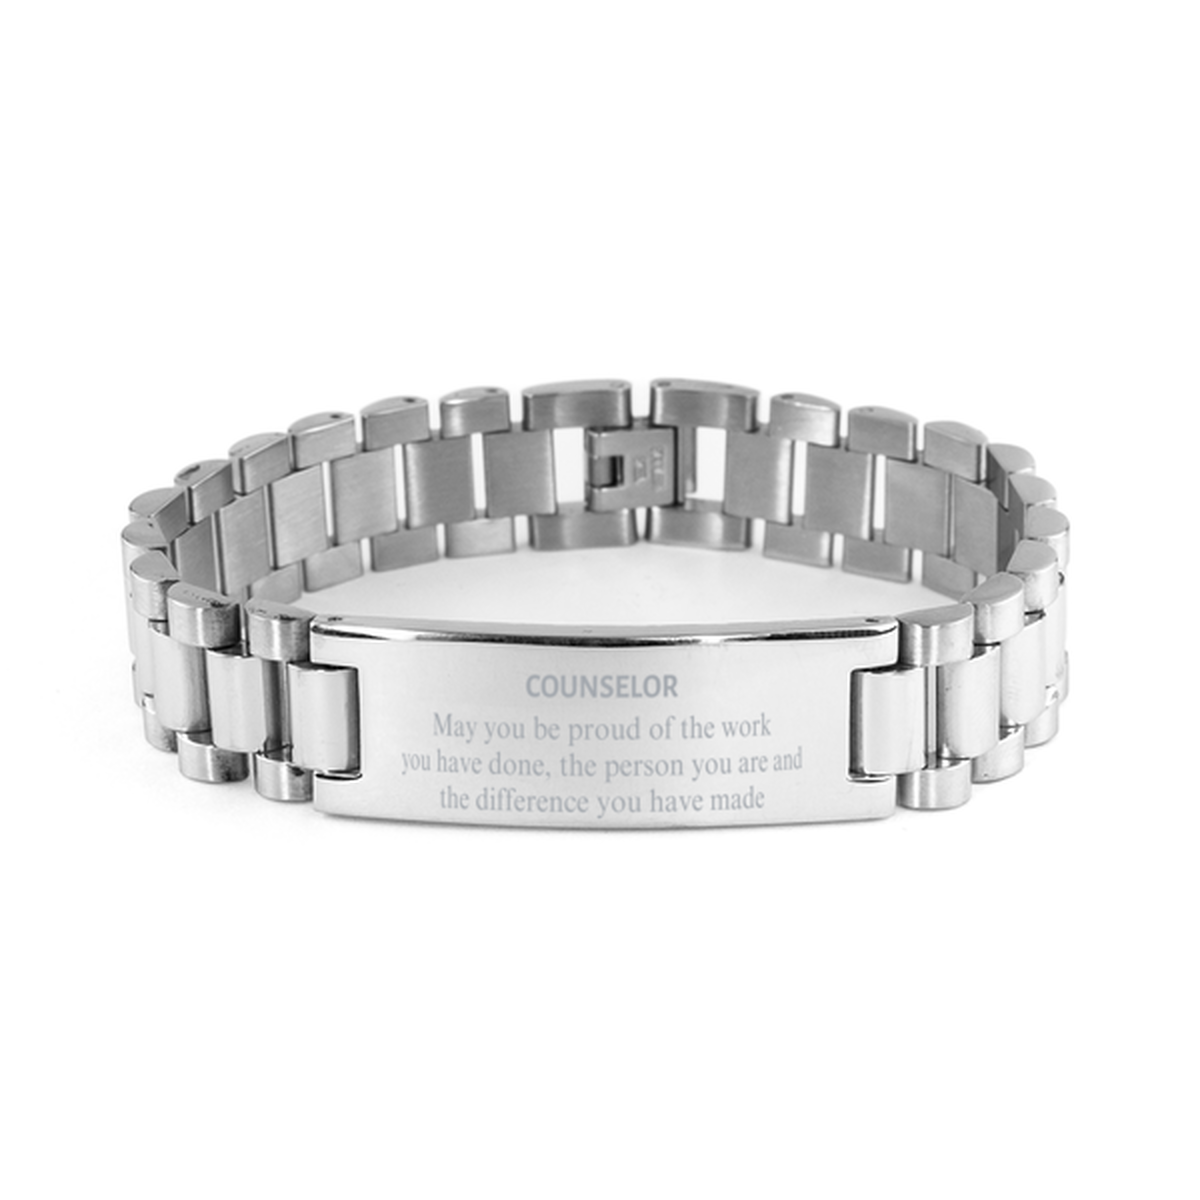 Counselor May you be proud of the work you have done, Retirement Counselor Ladder Stainless Steel Bracelet for Colleague Appreciation Gifts Amazing for Counselor